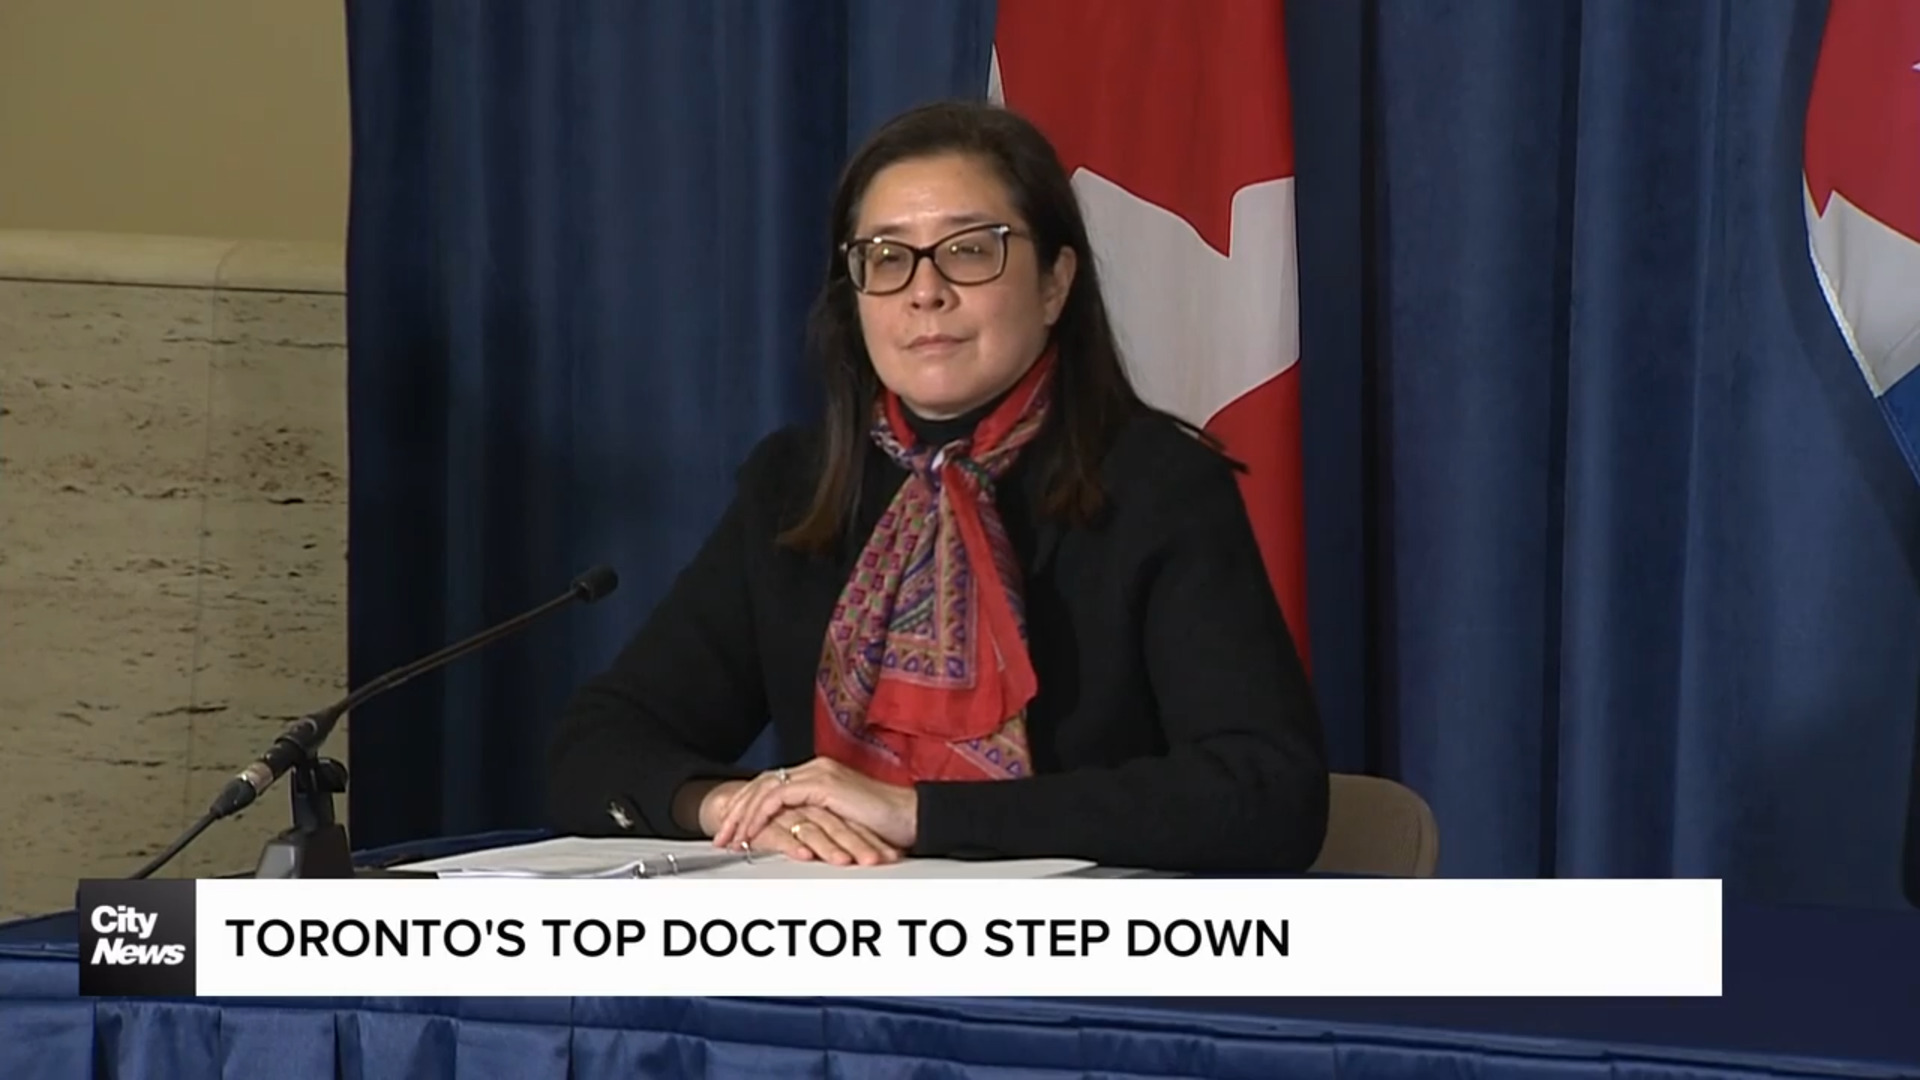 'It has been an honour of a lifetime': Toronto's top doctor announces her resignation